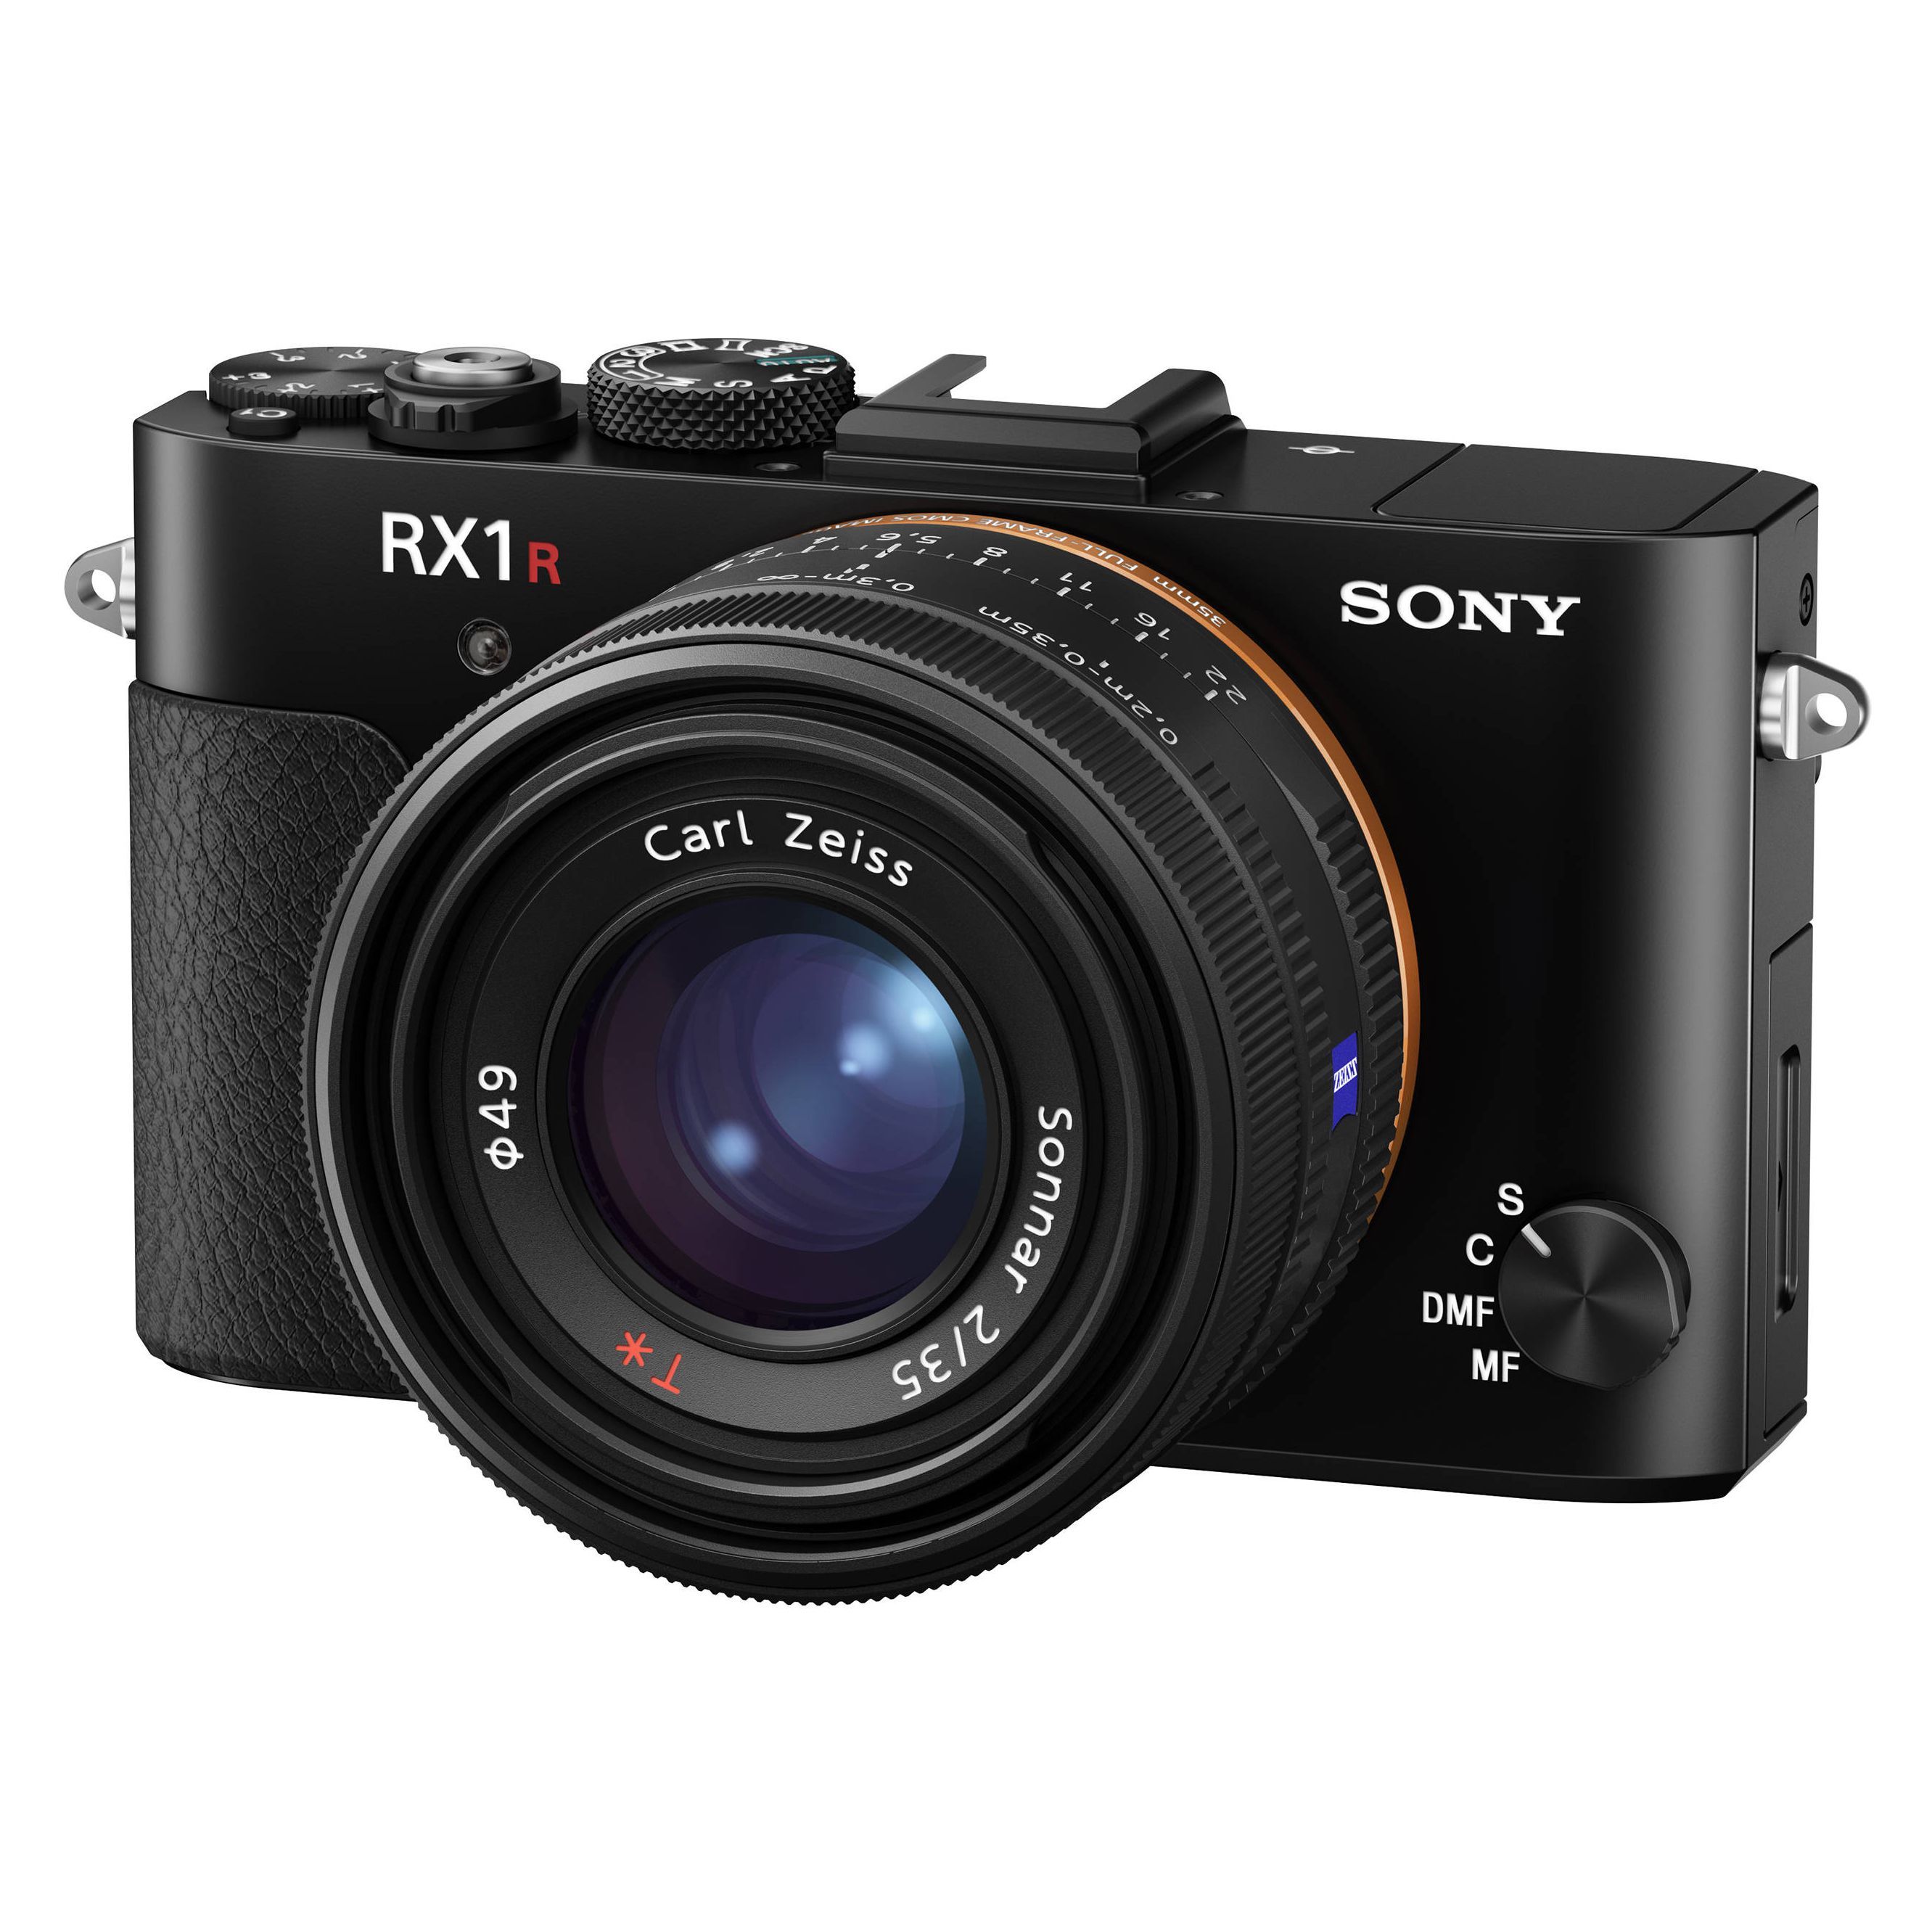 8 Best Sony Camera Reviews in 2018 Top Rated Digital and DSLR Sony